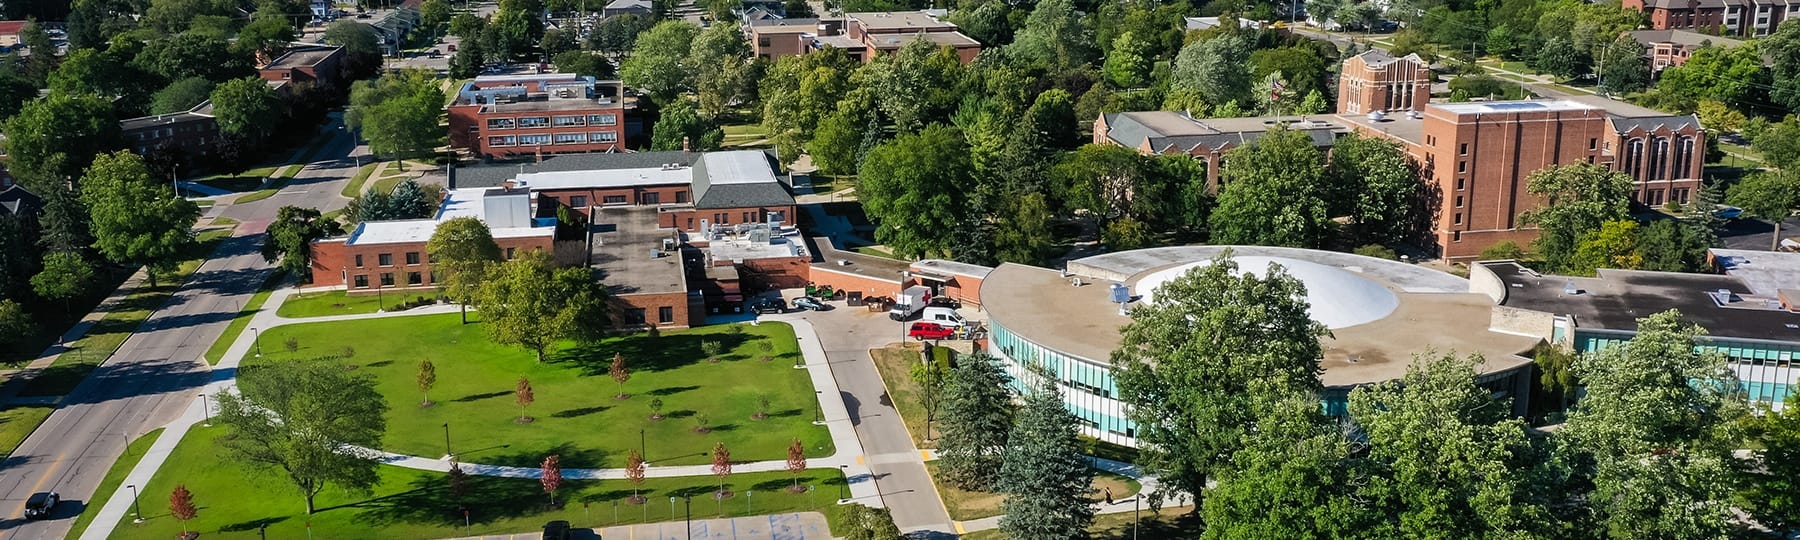 An aerial photograph of Central Michigan University's campus showing the University Center and green space.